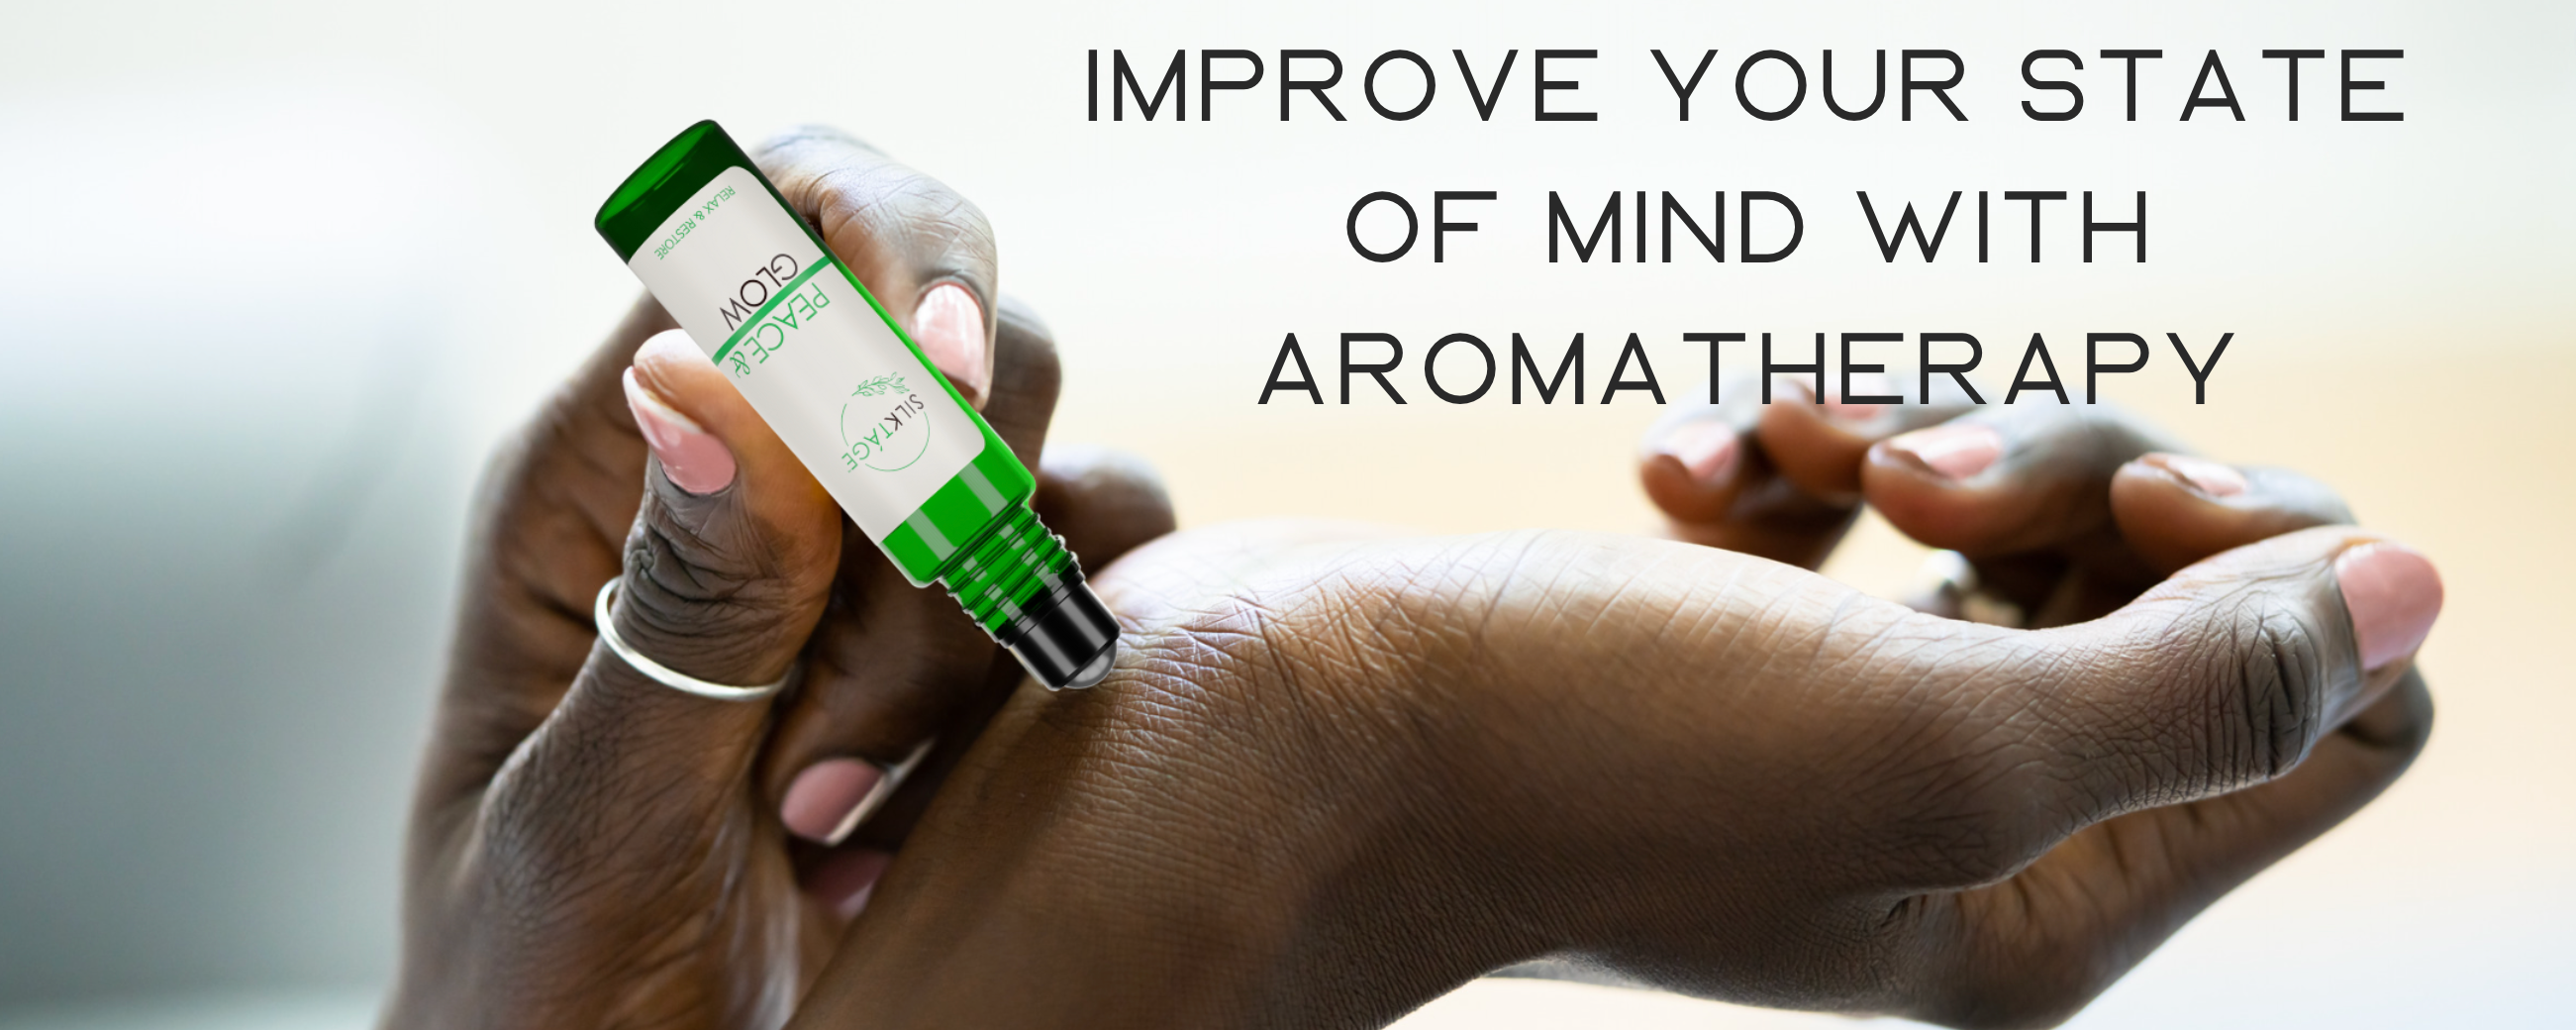 Soothe frazzled nerves and improve your state of mind with Aromatherapy